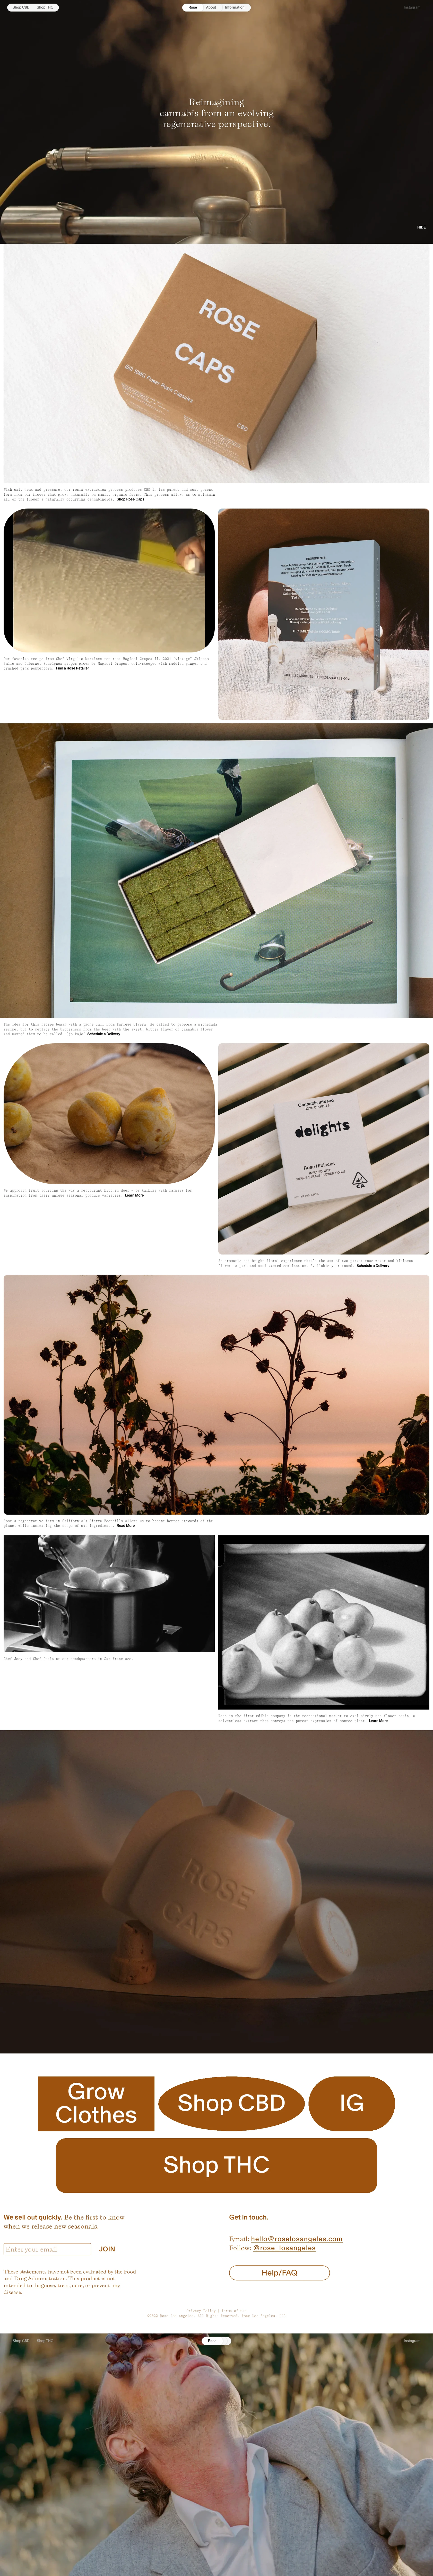 Rose Los Angeles Landing Page Example: Rose is the first edible company to exclusively use flower rosin, a solventless extract of cannabis flower with 100% cannabinoids and terpenes native to the plant.